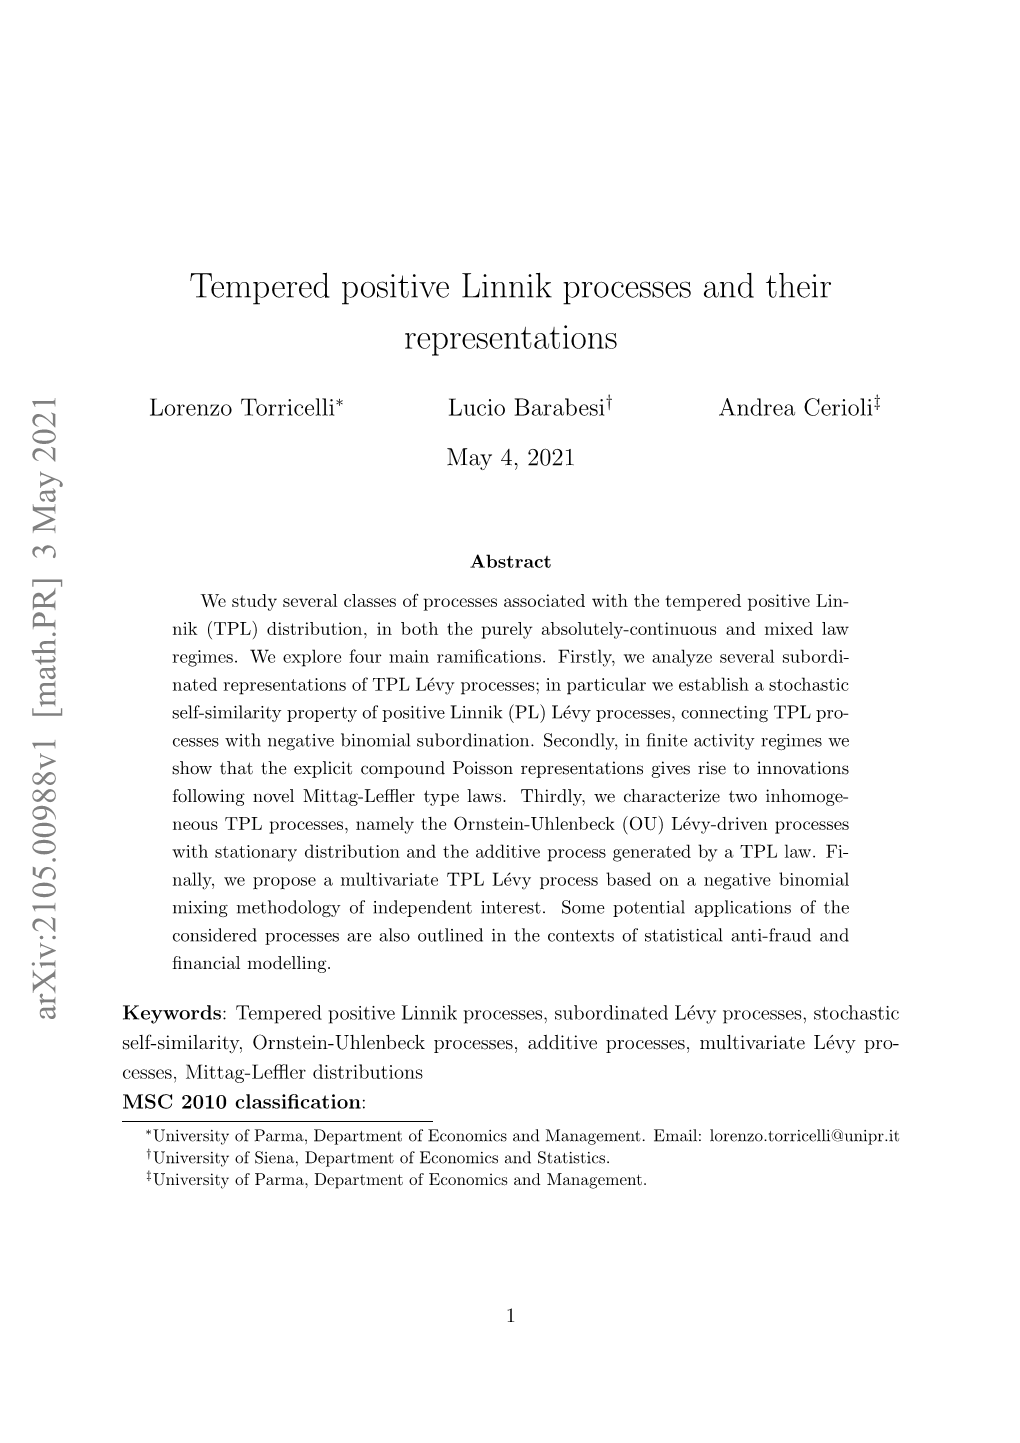 Tempered Positive Linnik Processes and Their Representations